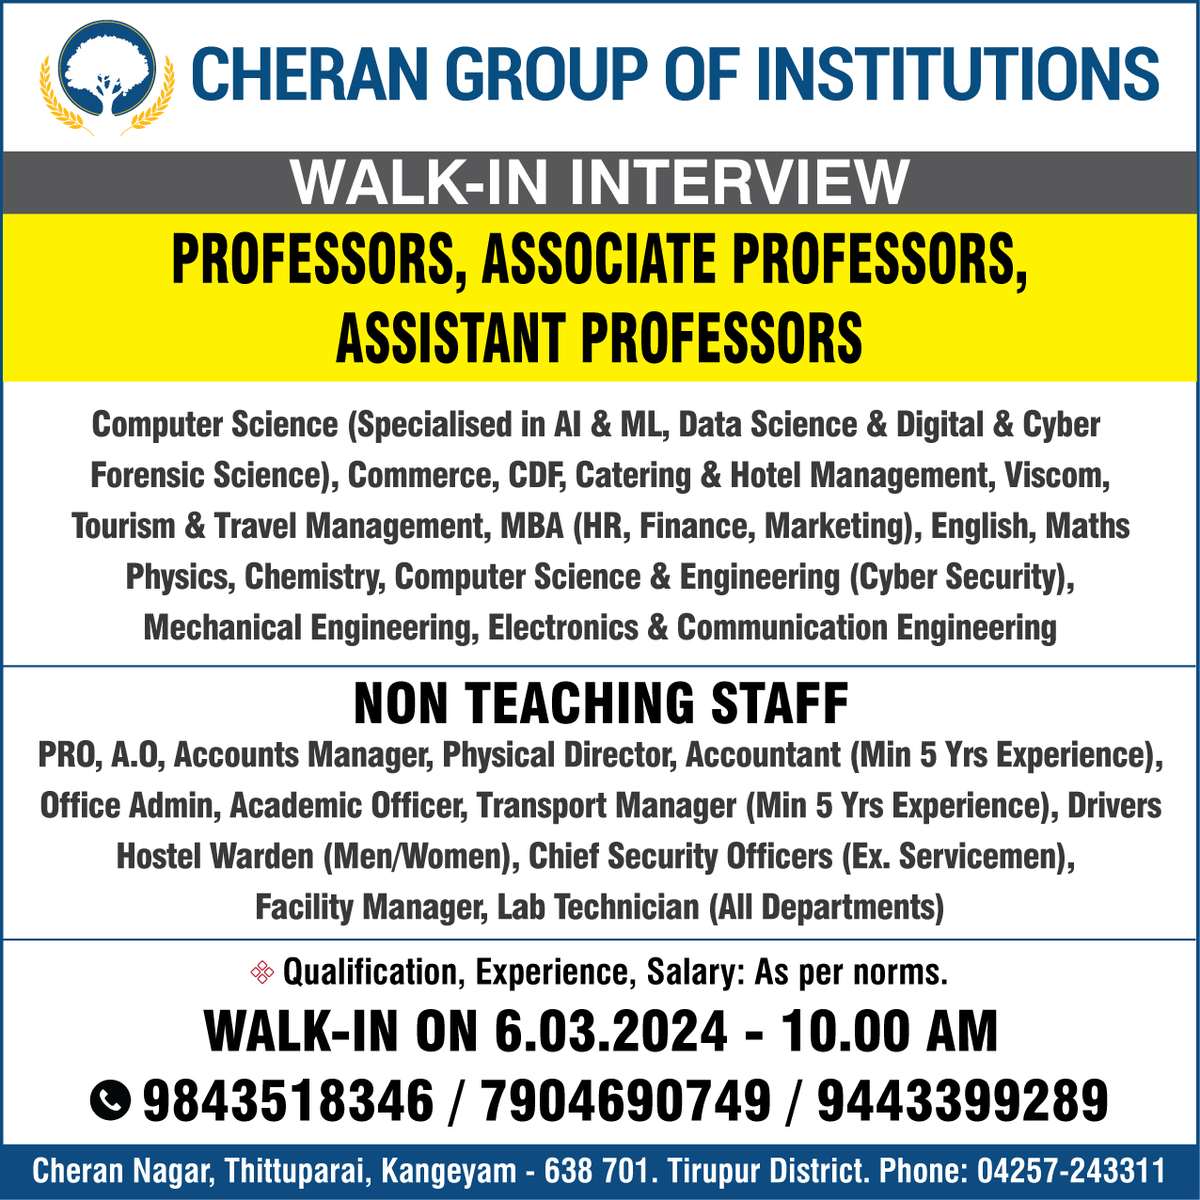 Exciting Opportunity Alert! 

We're conducting walk-in interviews for both teaching and non-teaching positions.

#CheranGroup #WalkInInterview #TeachingJobs #NonTeachingJobs #Careers #Vacancy #CareerOpportunity #Education #Jobs #Opportunity #HiringNow